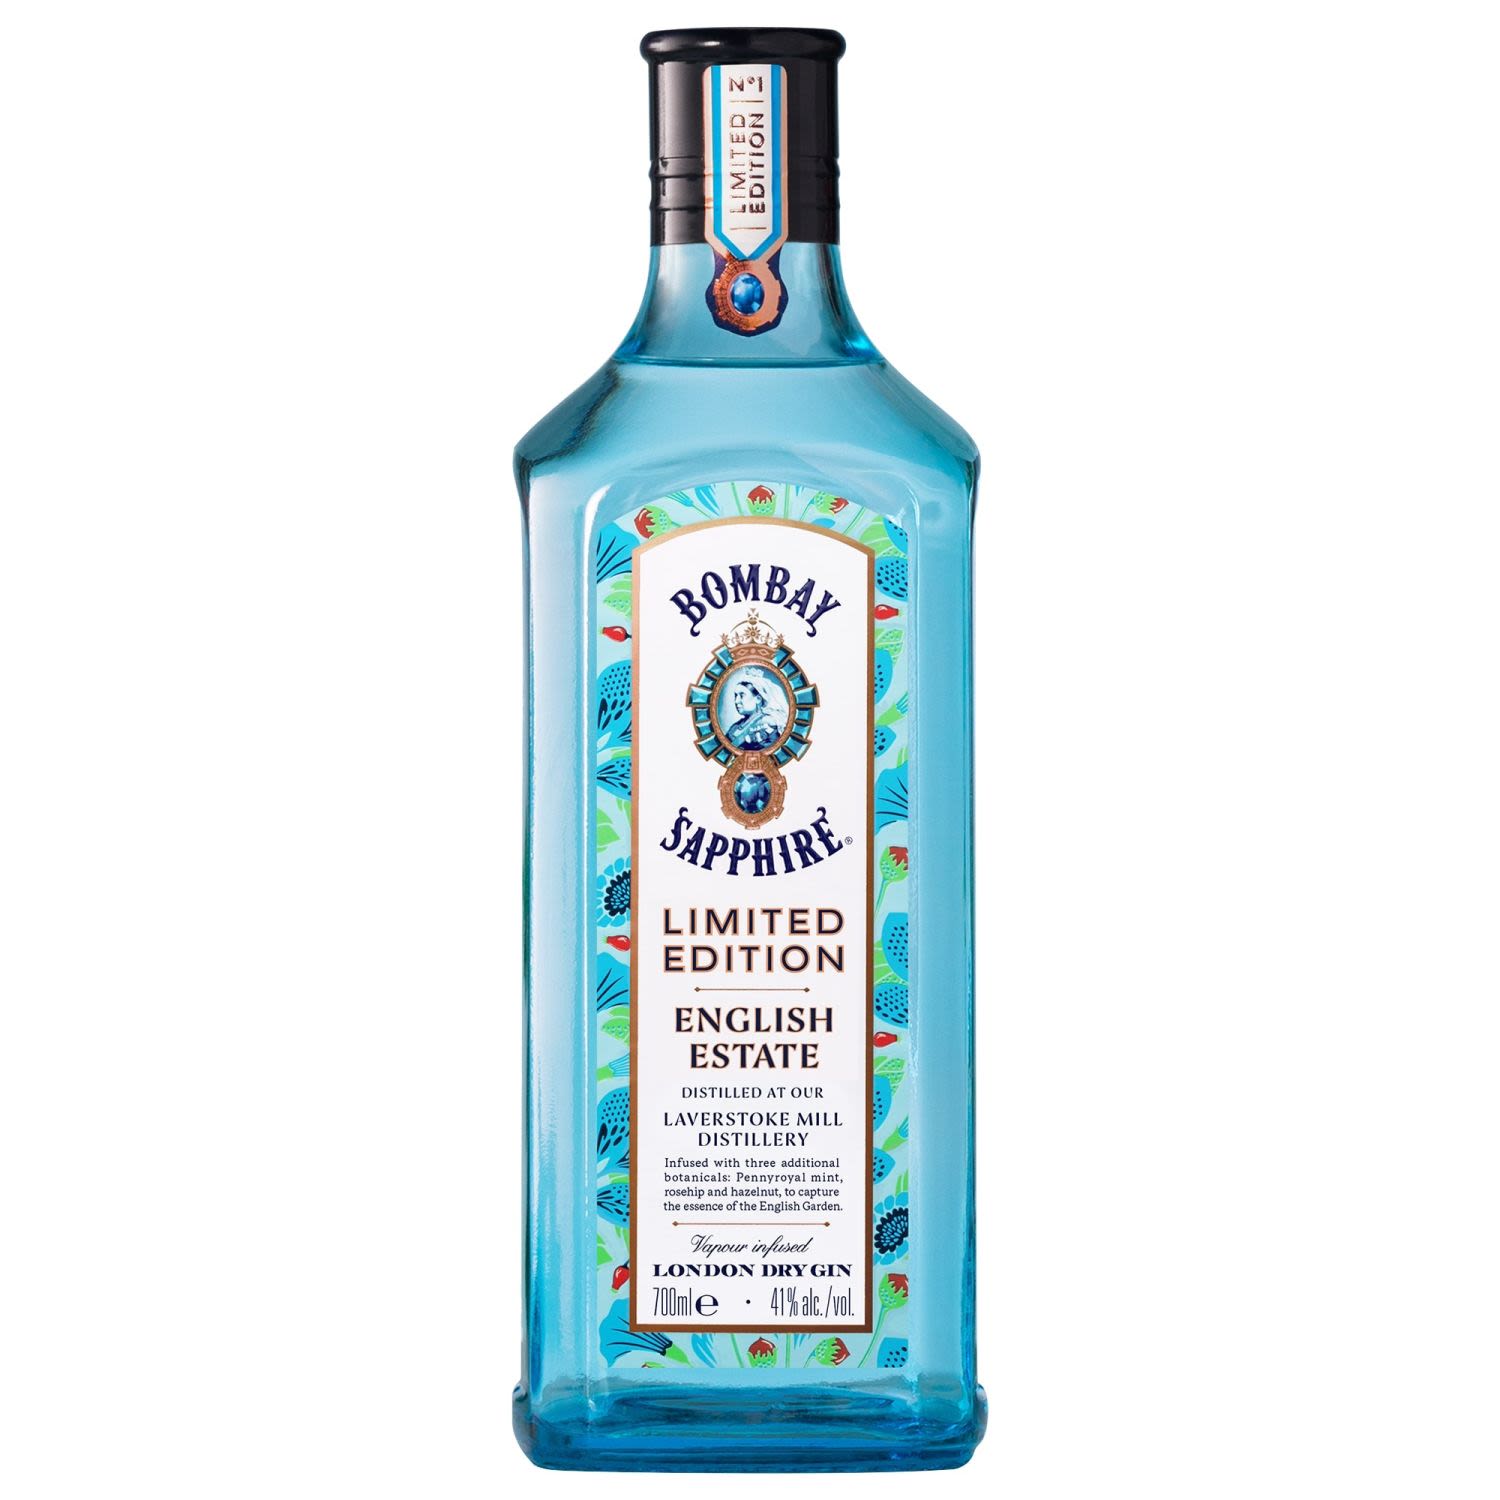 Bombay Sapphire English Estate is infused with a blend of pennyroyal mint, rosehip and toasted hazlenuts, inspired by their home in the heart of the English countryside. A refreshingly unique gin of true English provenance.<br /> <br />Alcohol Volume: 41.00%<br /><br />Pack Format: Bottle<br /><br />Standard Drinks: 23</br /><br />Pack Type: Bottle<br /><br />Country of Origin: England<br />